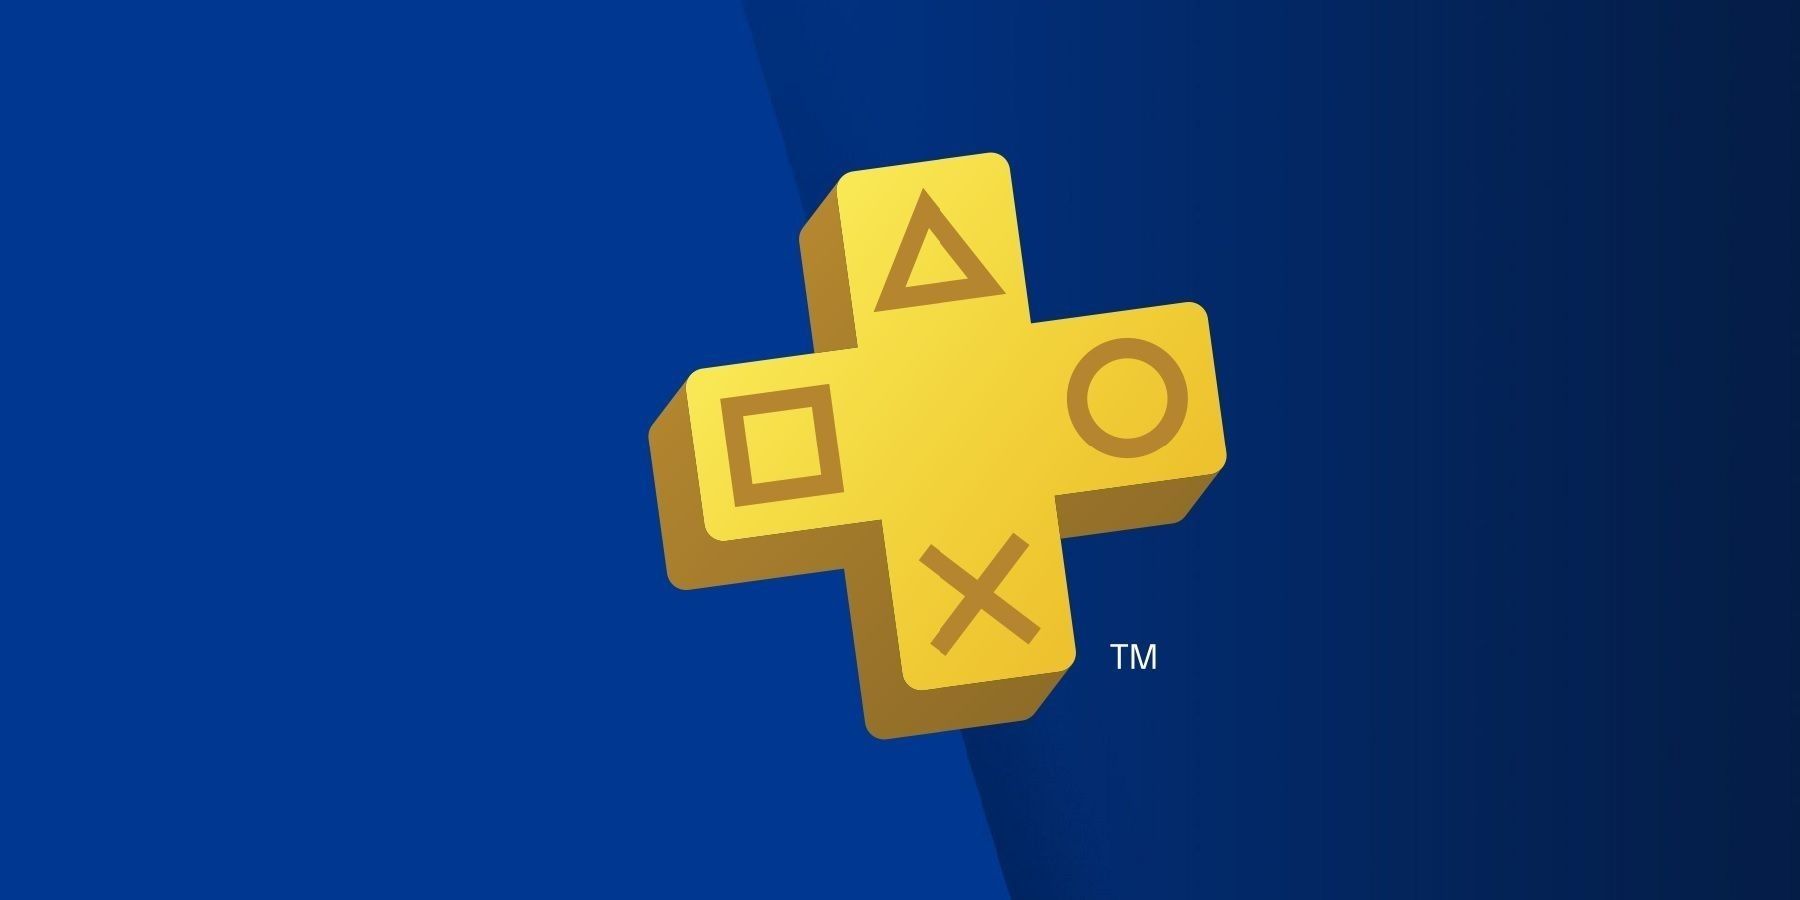 All games coming to PlayStation Plus Premium: Bioshock Remastered,  Borderlands The Handsome Collection, and more